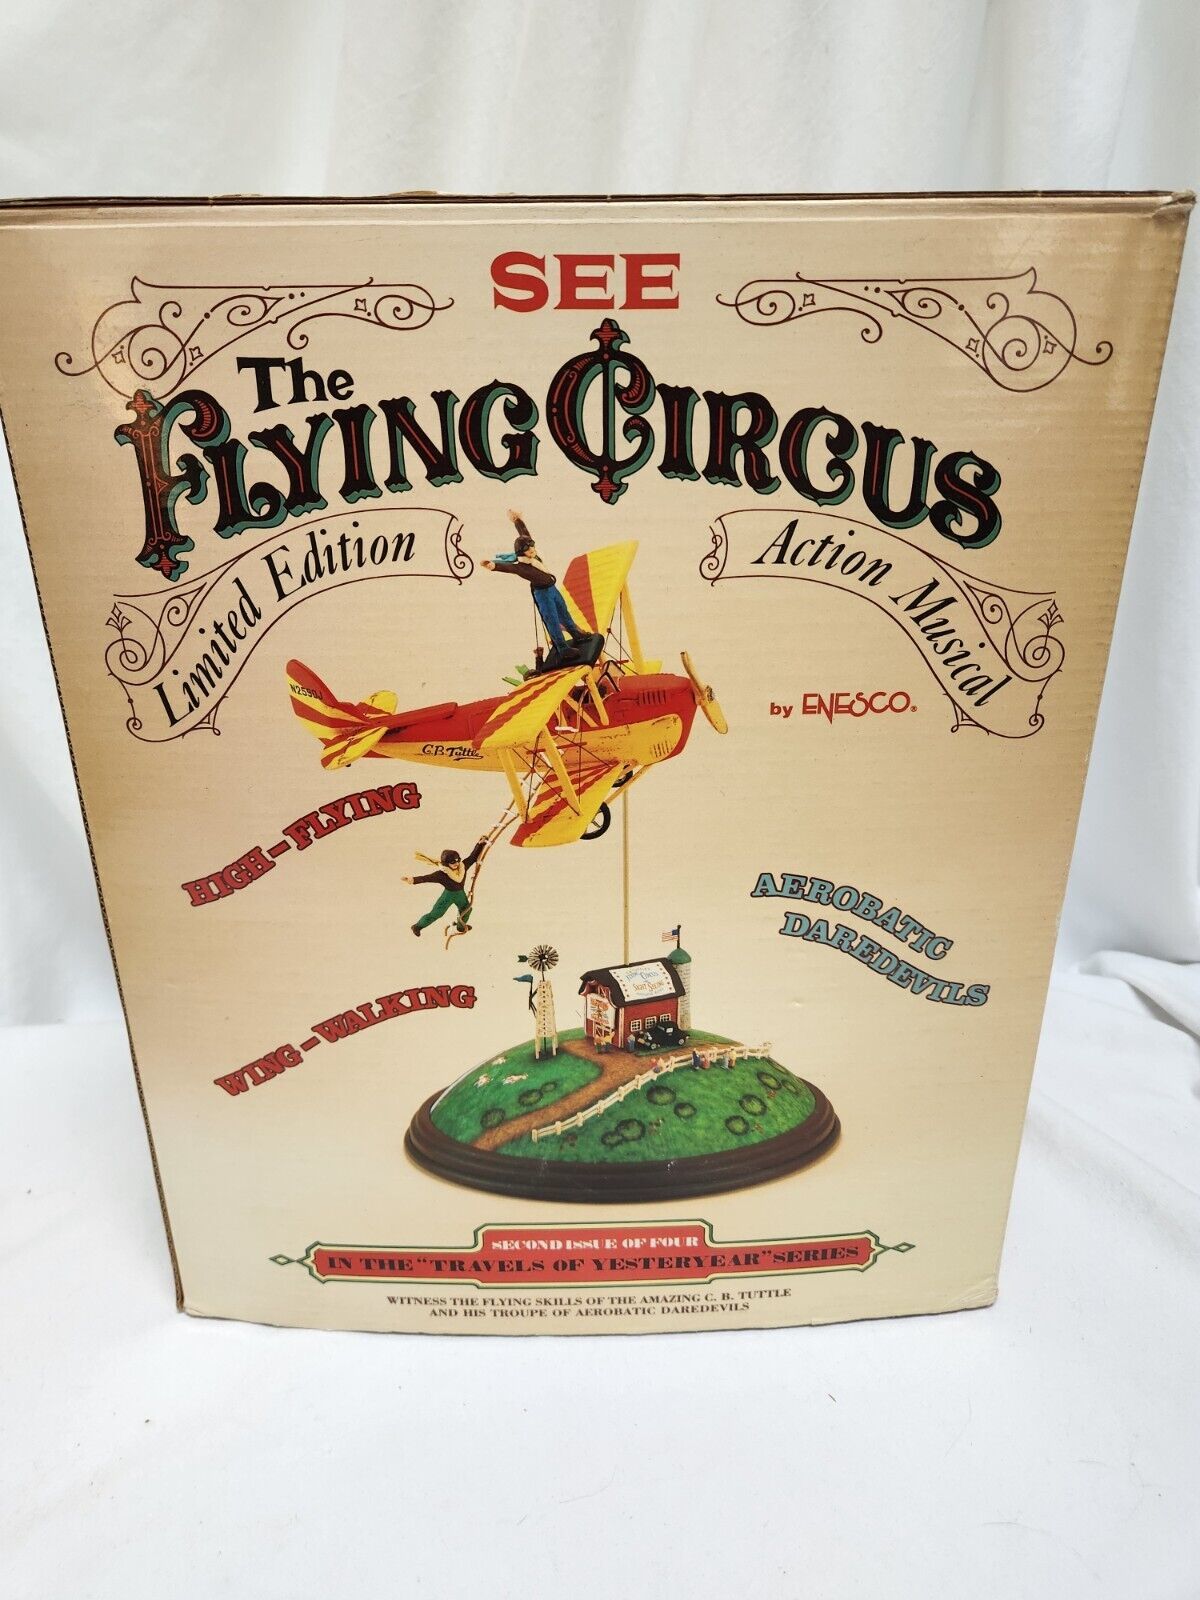 Enesco Limited Edition The Flying Circus and 38 similar items